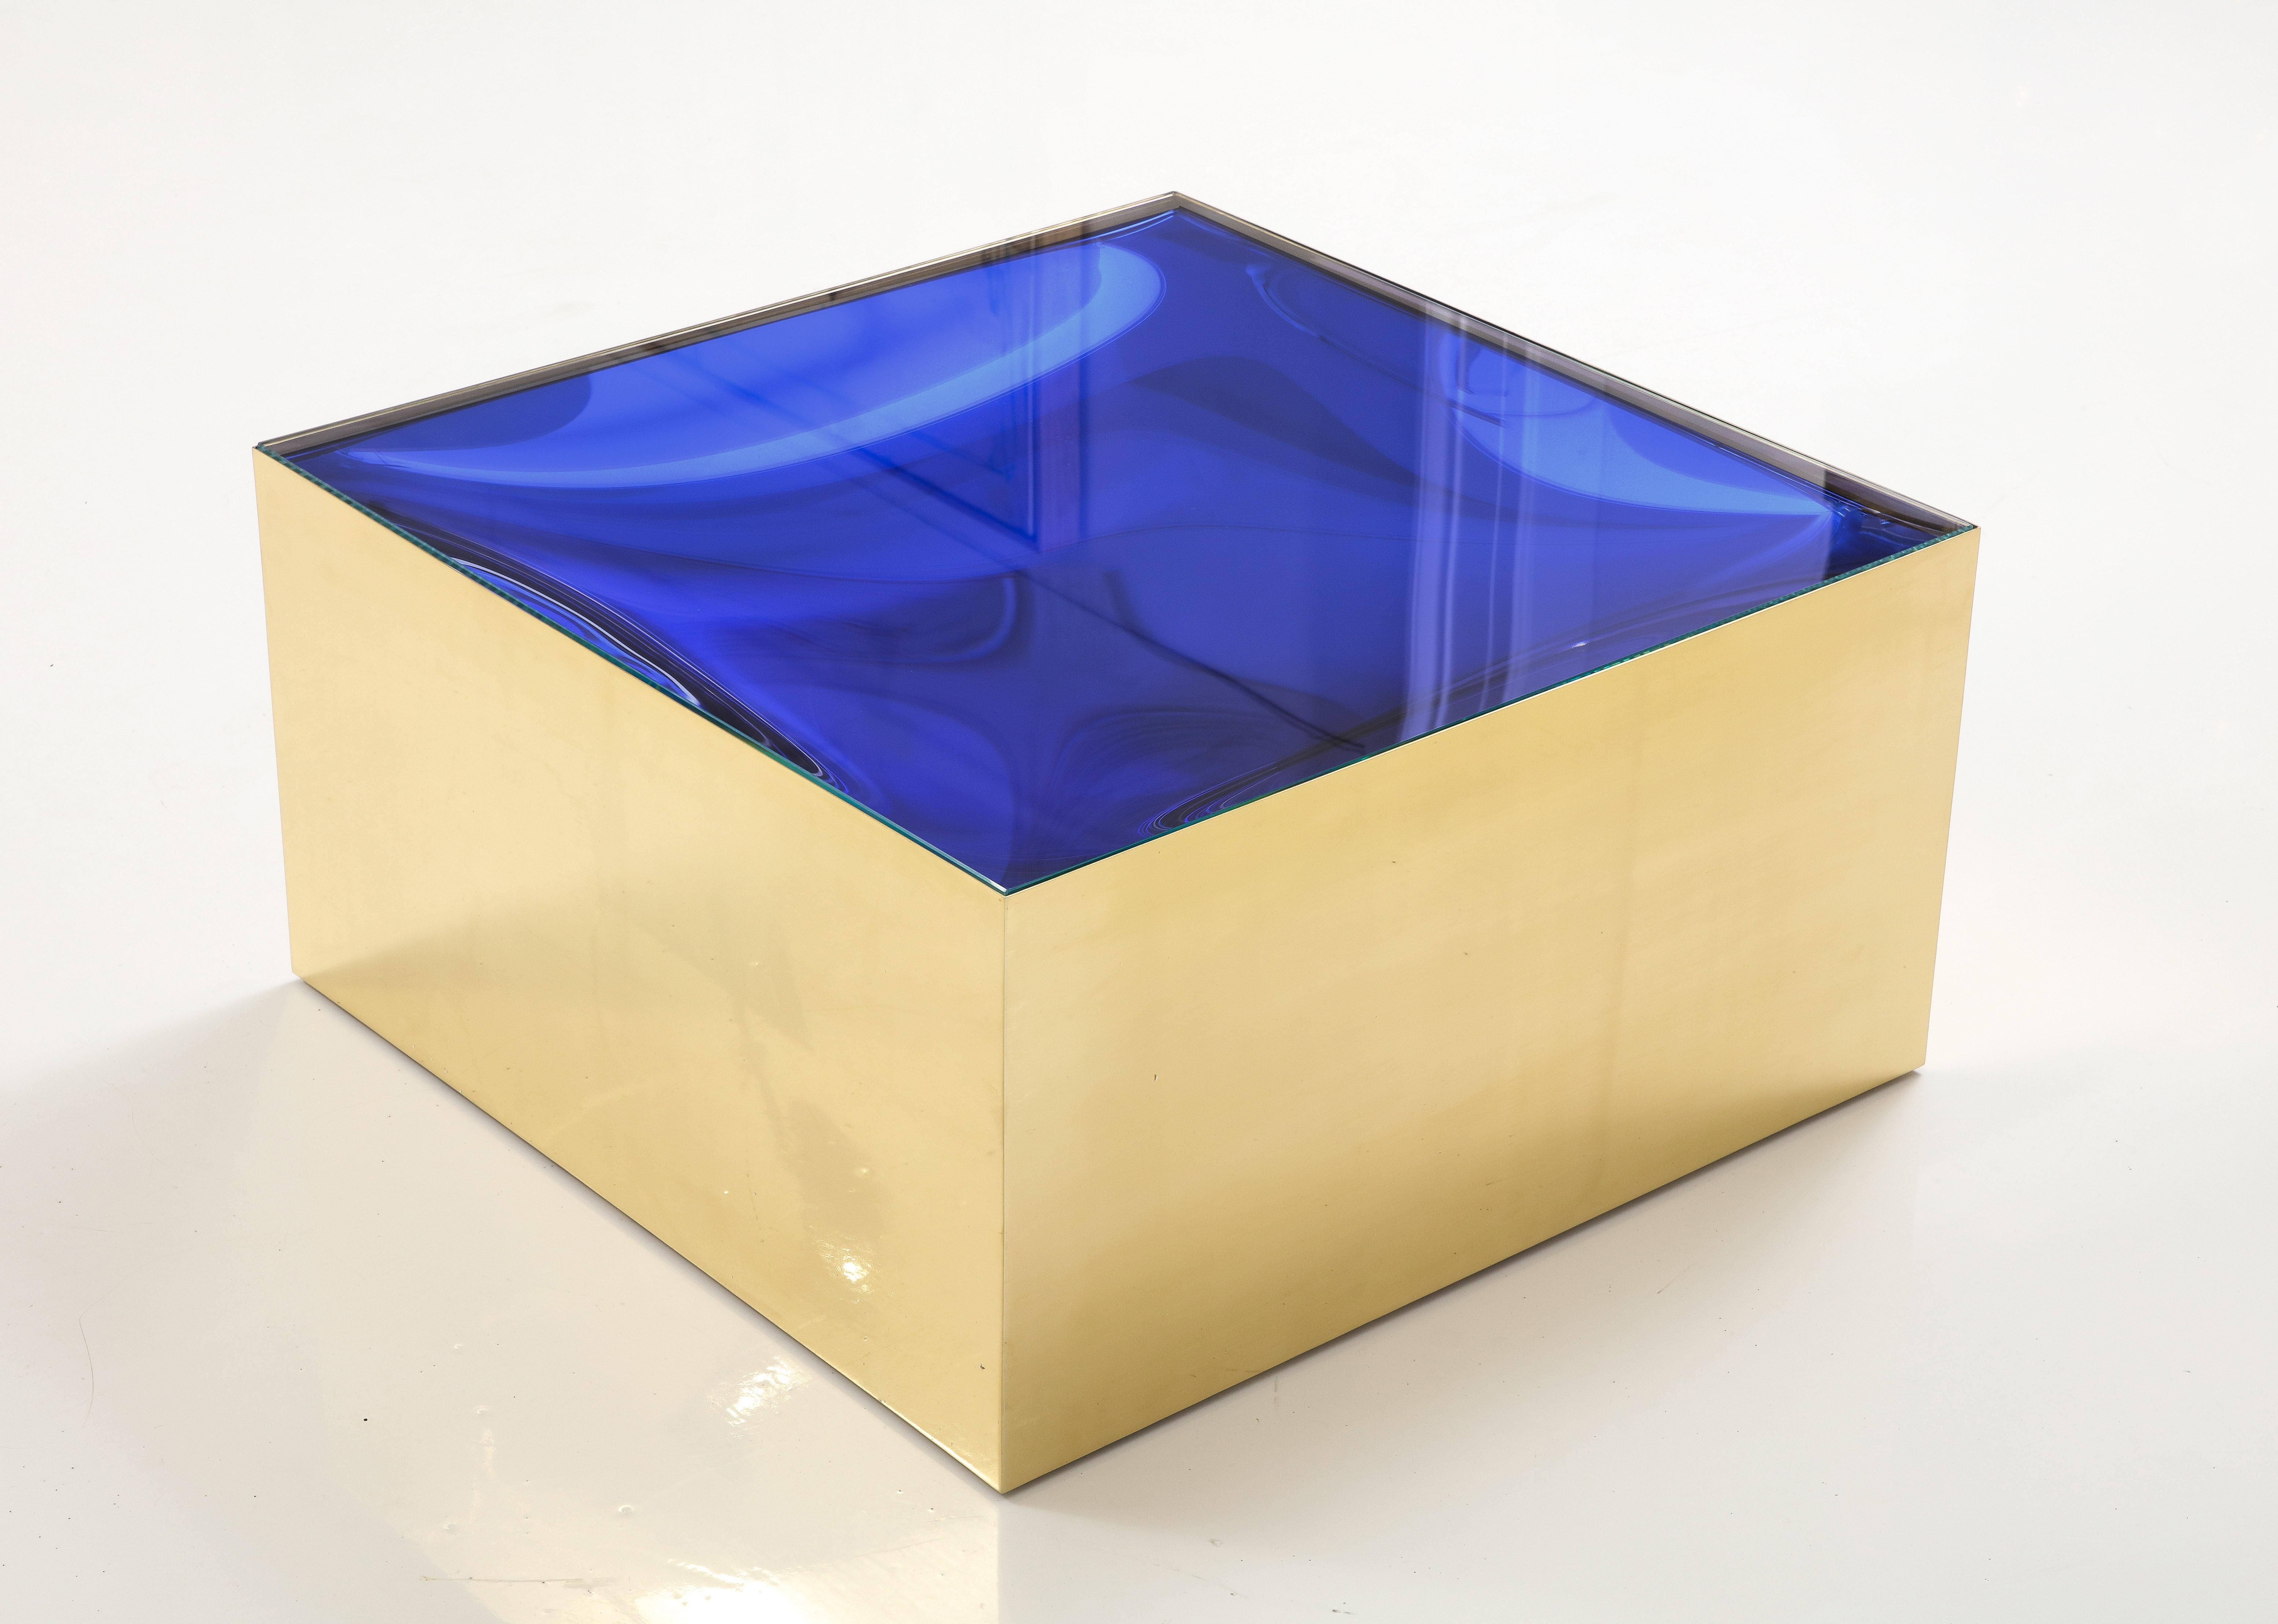 Bespoke and specially designed square brass and blue glass cocktail or coffee table inspired by Max Ingrand for Fontana Arte. This cocktail or coffee table consists of a square base in lacquered brass with 2 top glass inserts. The first (or inner